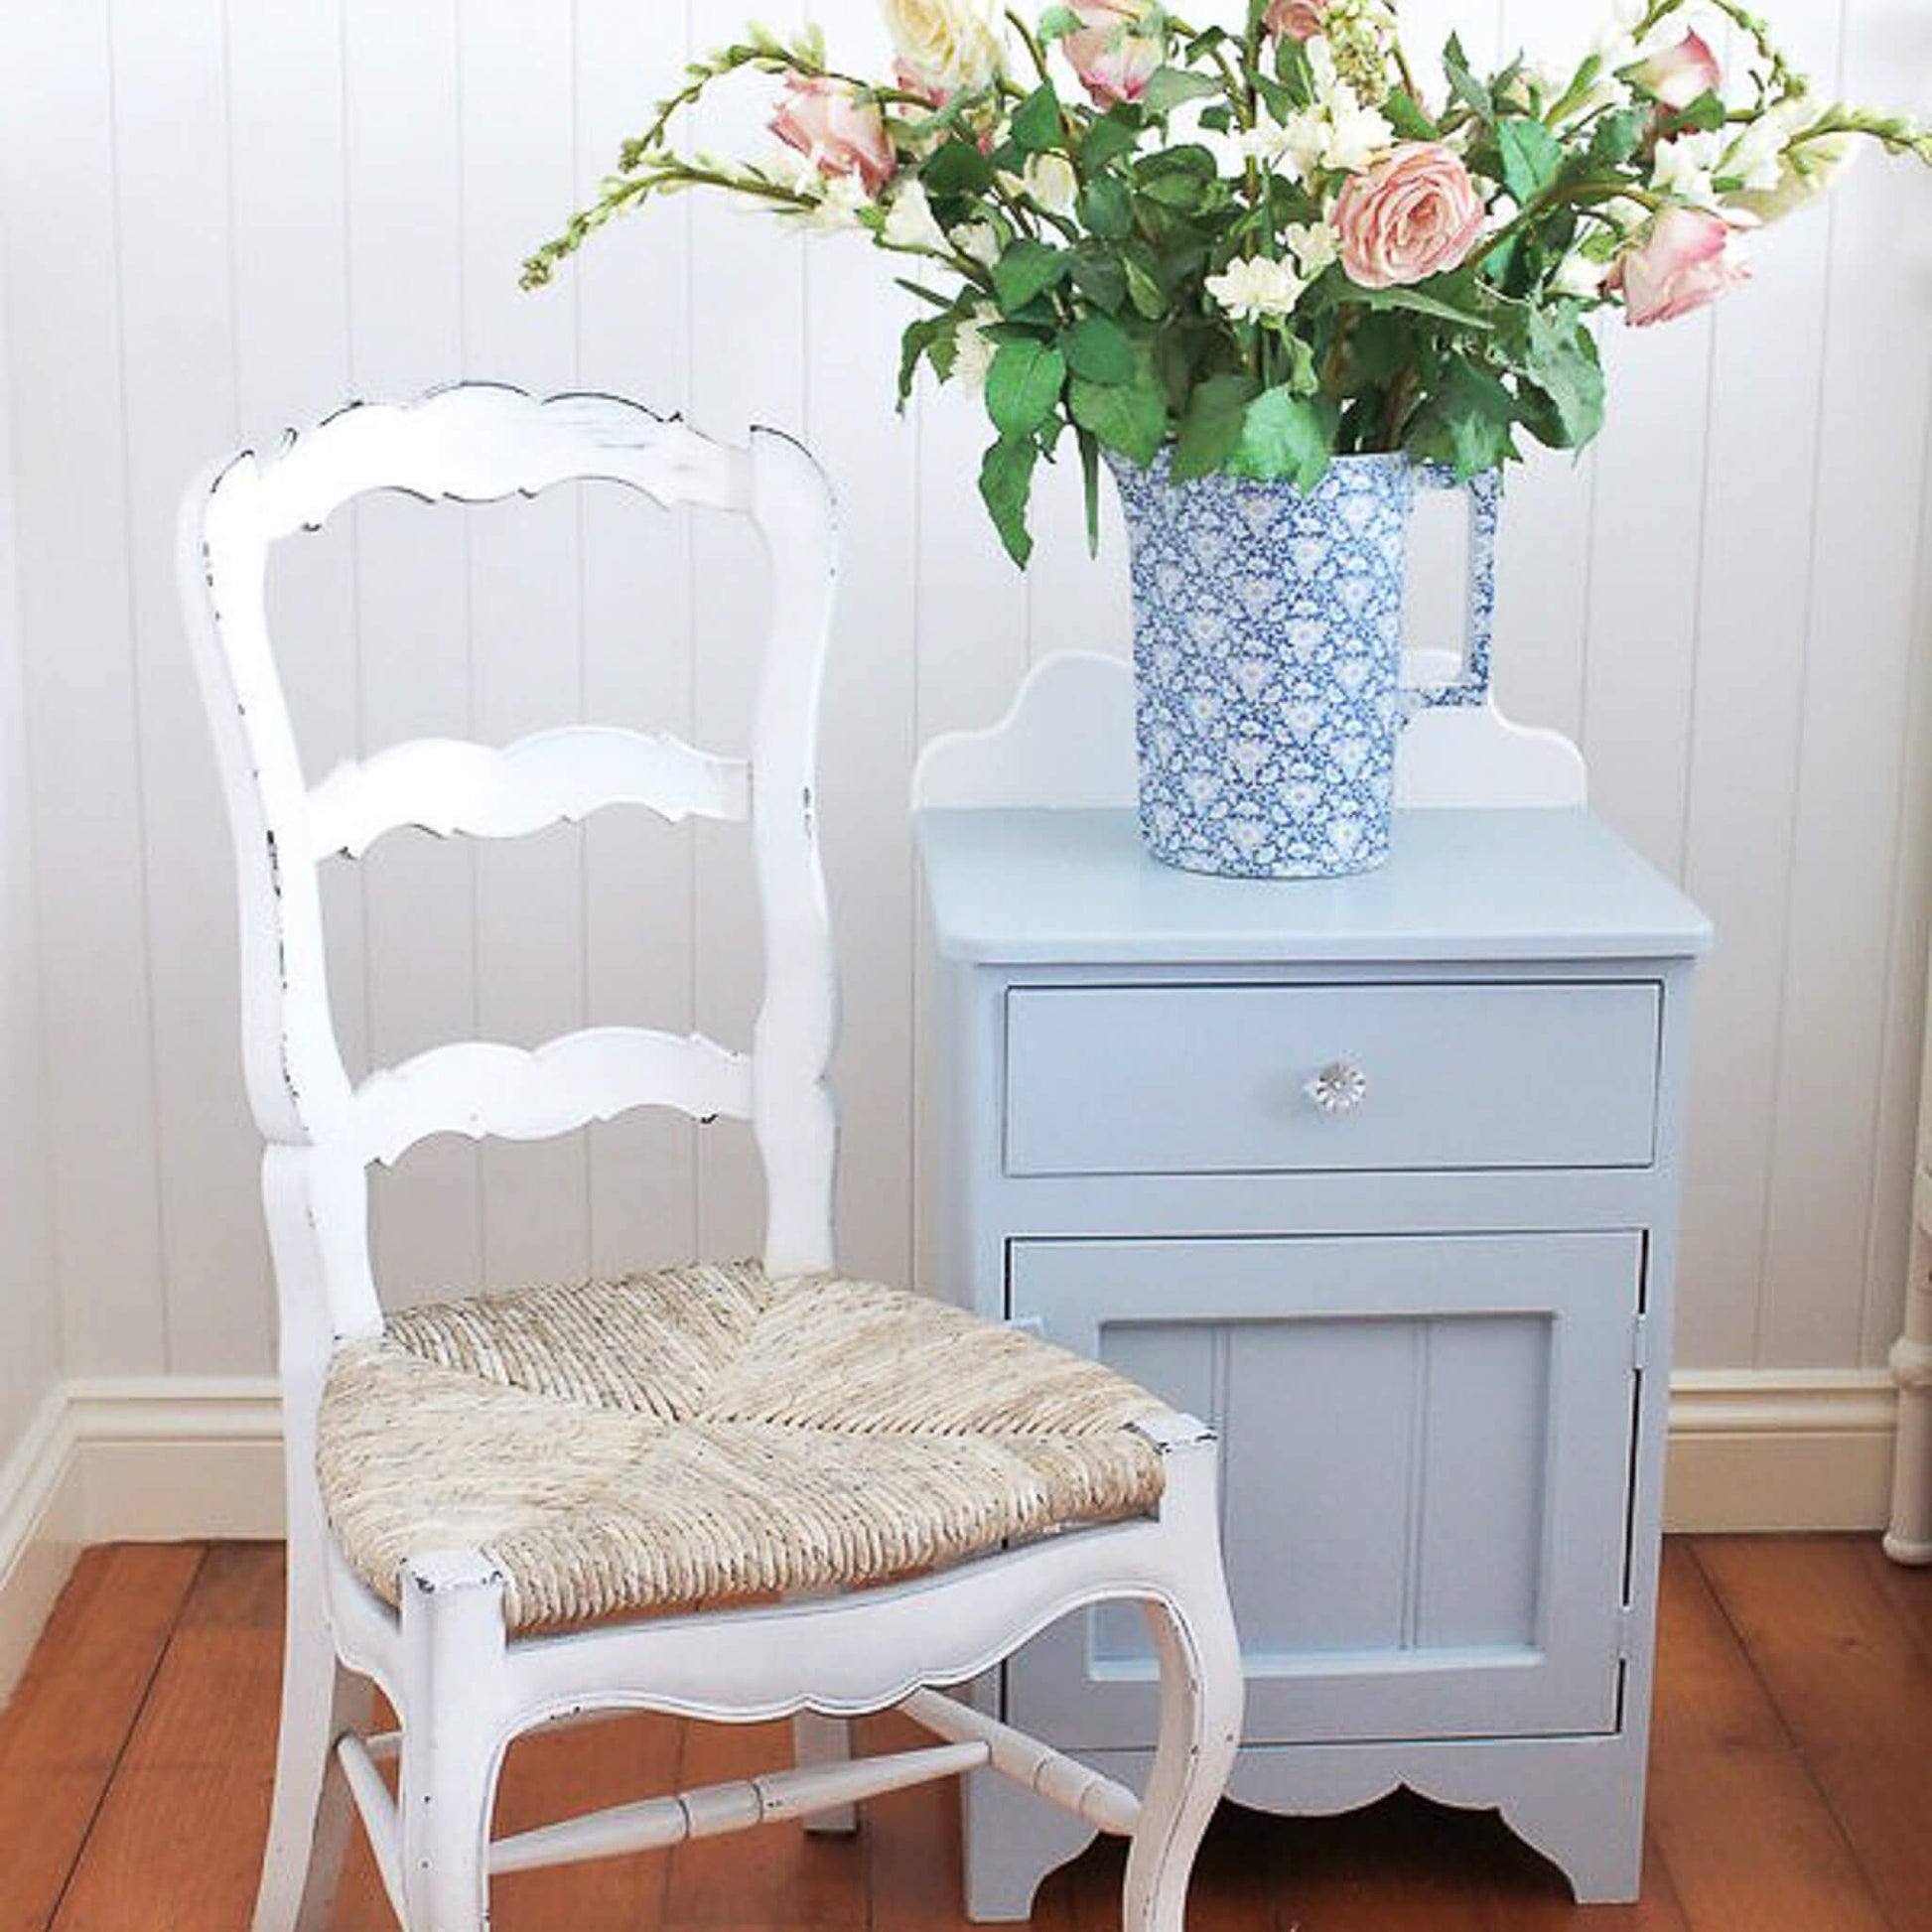 Vintage chair and bedside table painted in New White and French Blue Blake & Taylor Chalk Furniture Paint